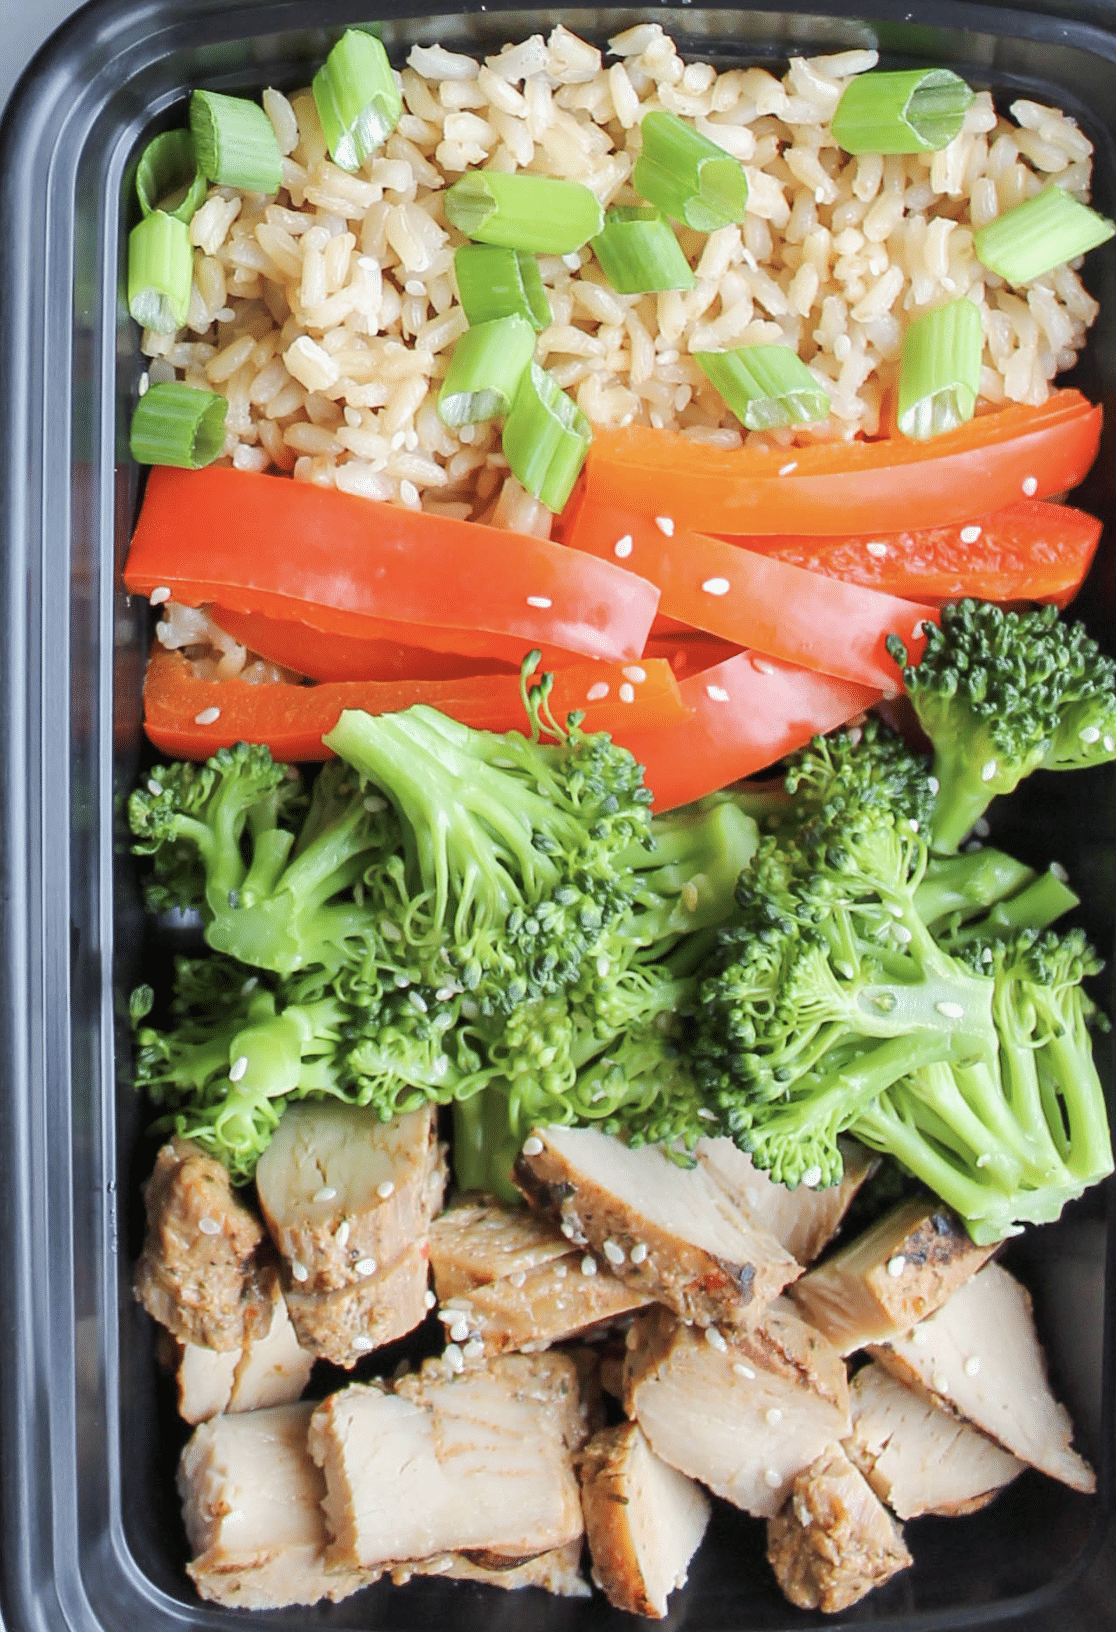 http://smilesandwich.com/wp-content/uploads/2017/04/Teriyaki-Chicken-and-Broccoli-Meal-Prep-Bowl.png